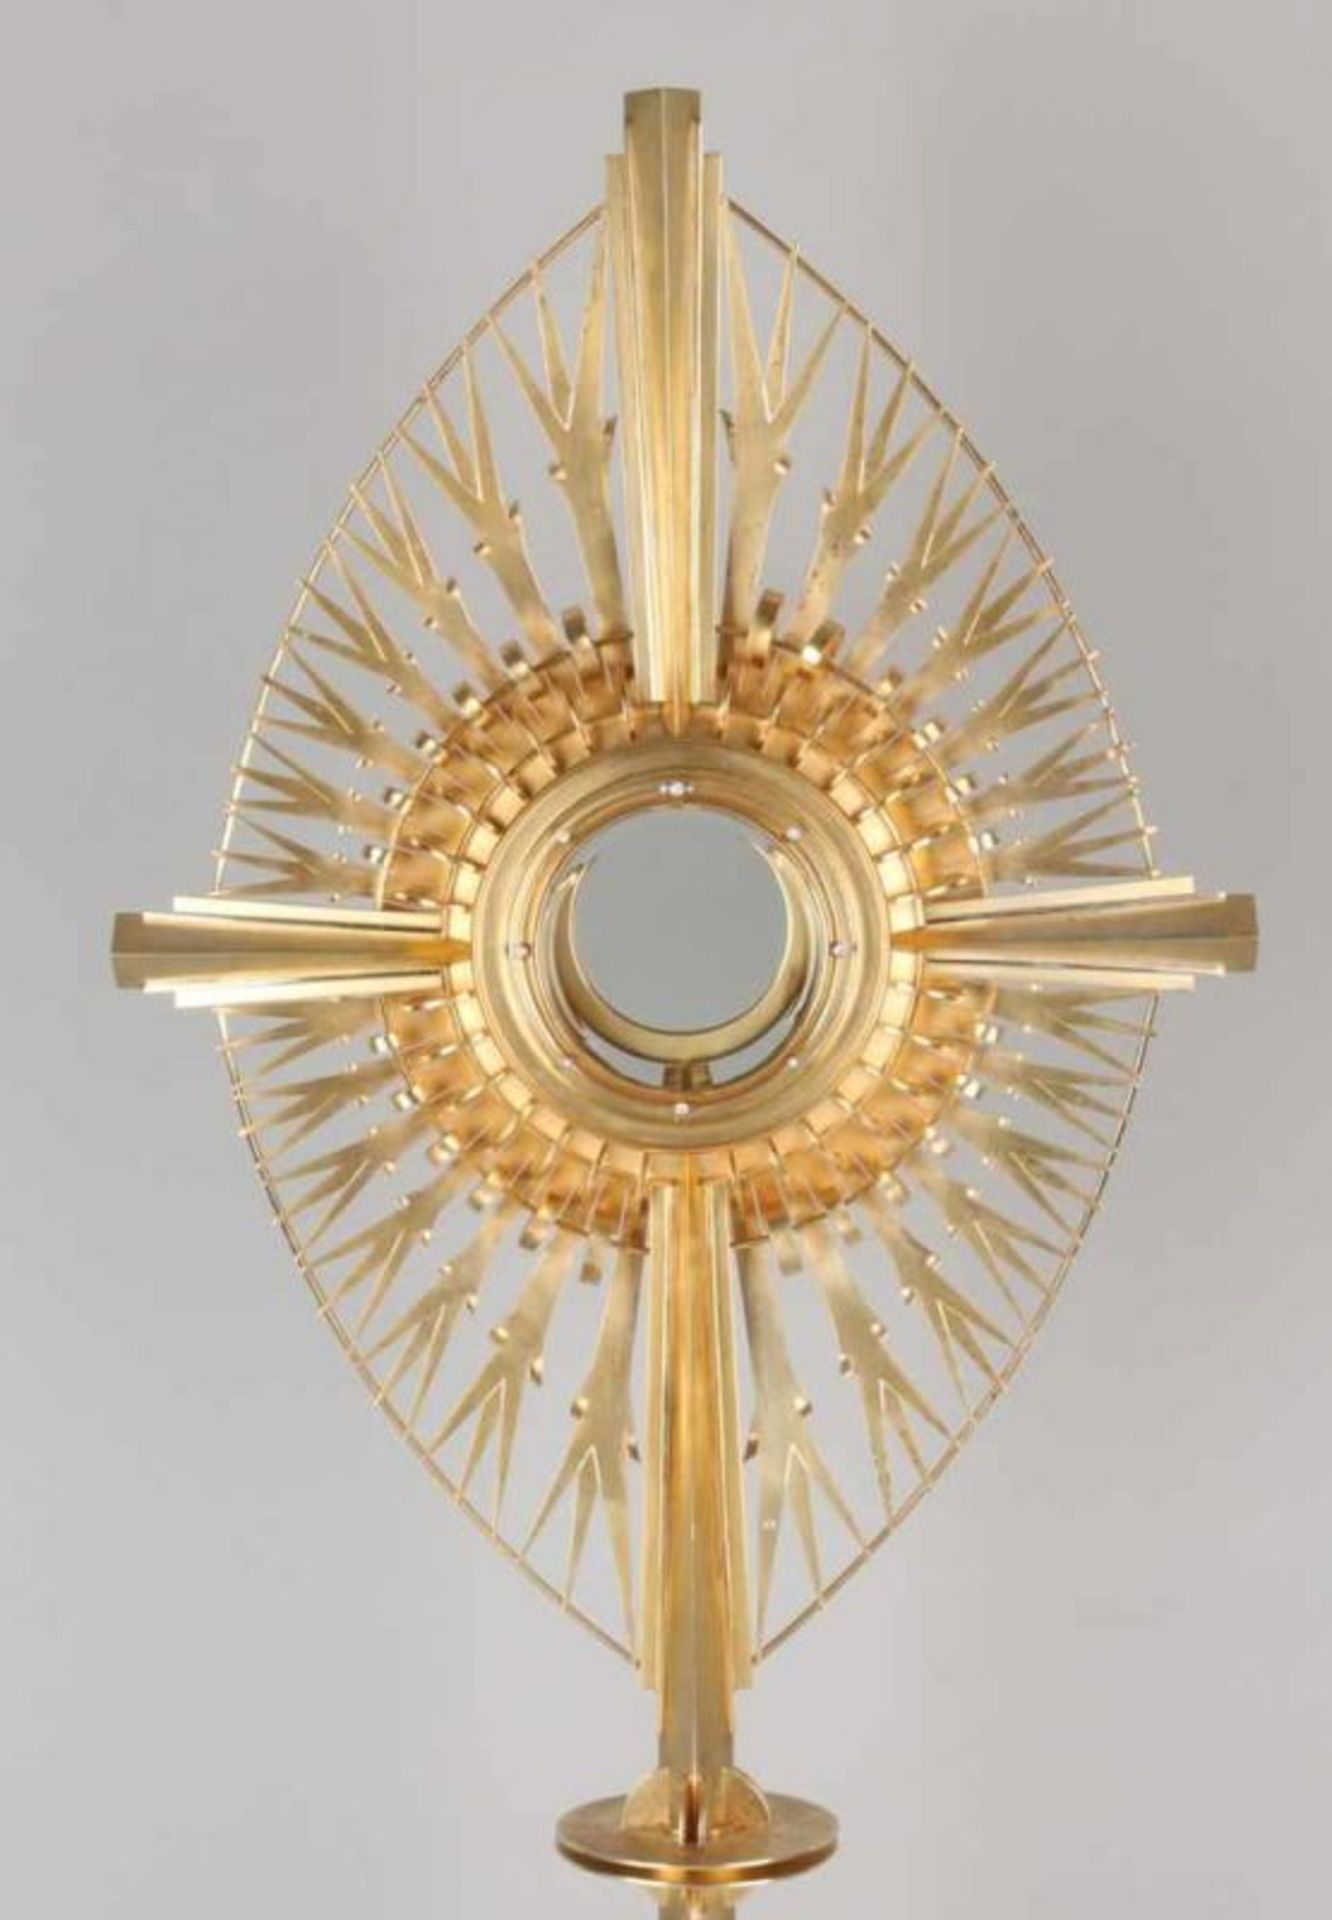 Beautiful silver plated monstrance, 833/000, made by Brom Utrecht. Marquis style with sawn curls and - Image 3 of 3